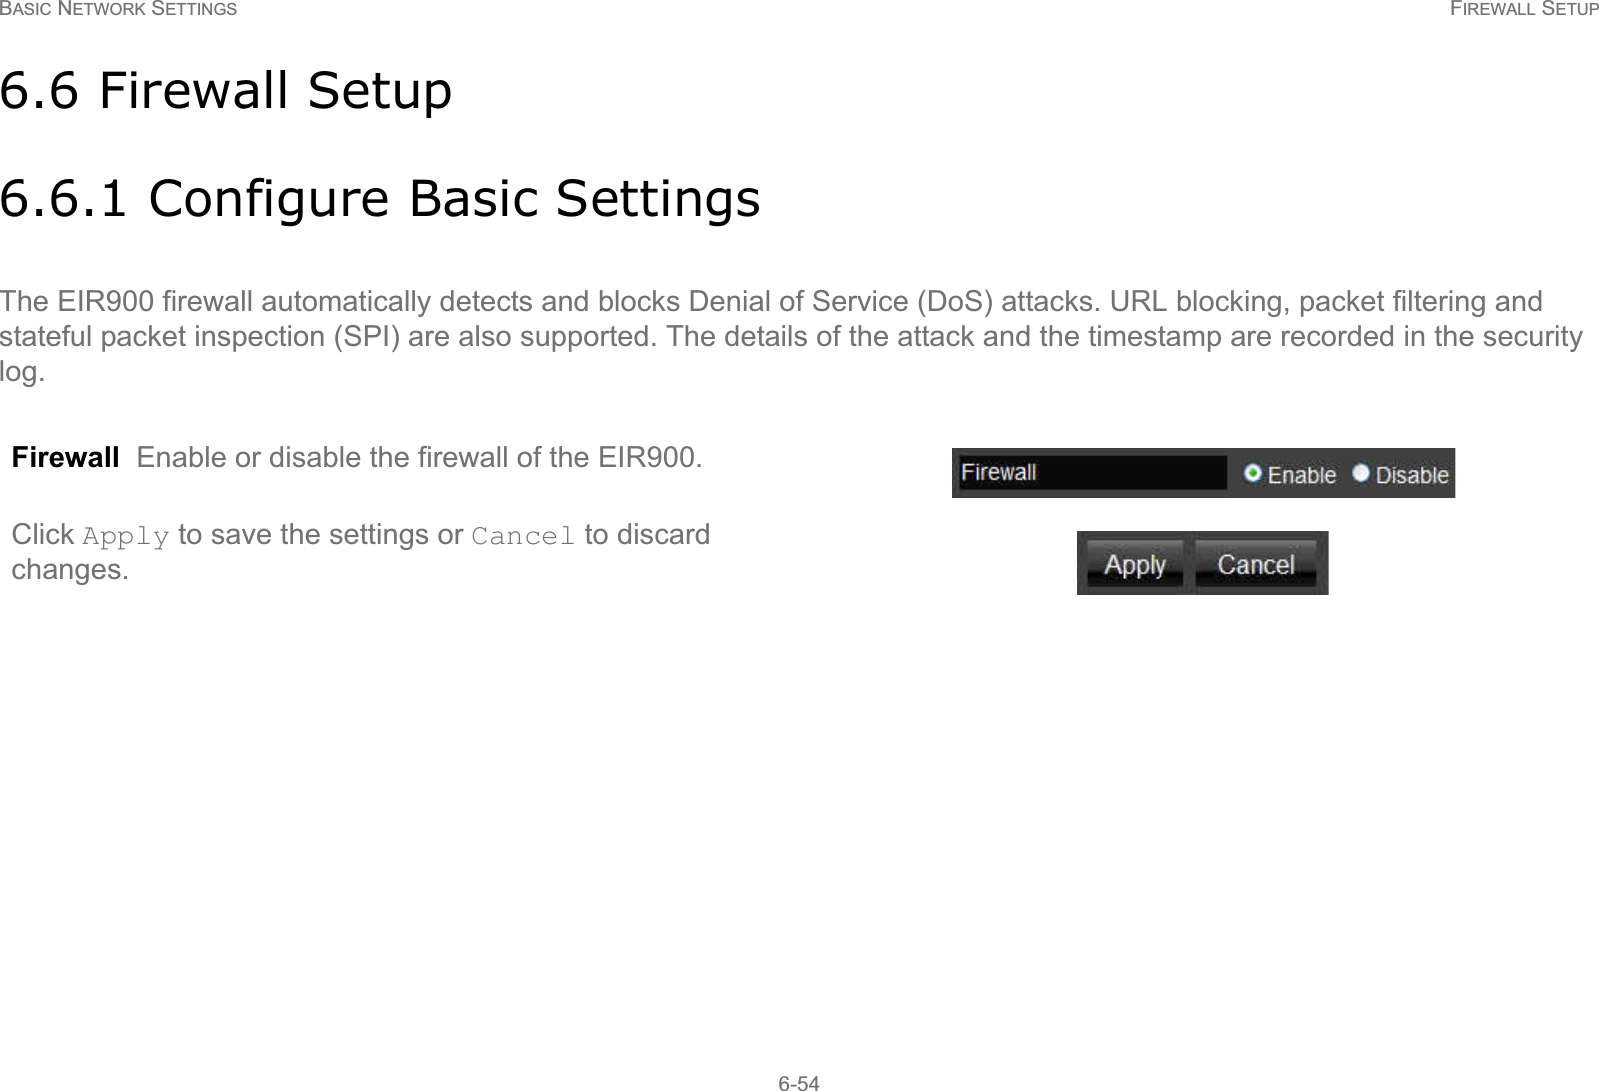 BASIC NETWORK SETTINGS FIREWALL SETUP6-546.6 Firewall Setup6.6.1 Configure Basic SettingsThe EIR900 firewall automatically detects and blocks Denial of Service (DoS) attacks. URL blocking, packet filtering and stateful packet inspection (SPI) are also supported. The details of the attack and the timestamp are recorded in the security log.Firewall  Enable or disable the firewall of the EIR900.Click Apply to save the settings or Cancel to discard changes.